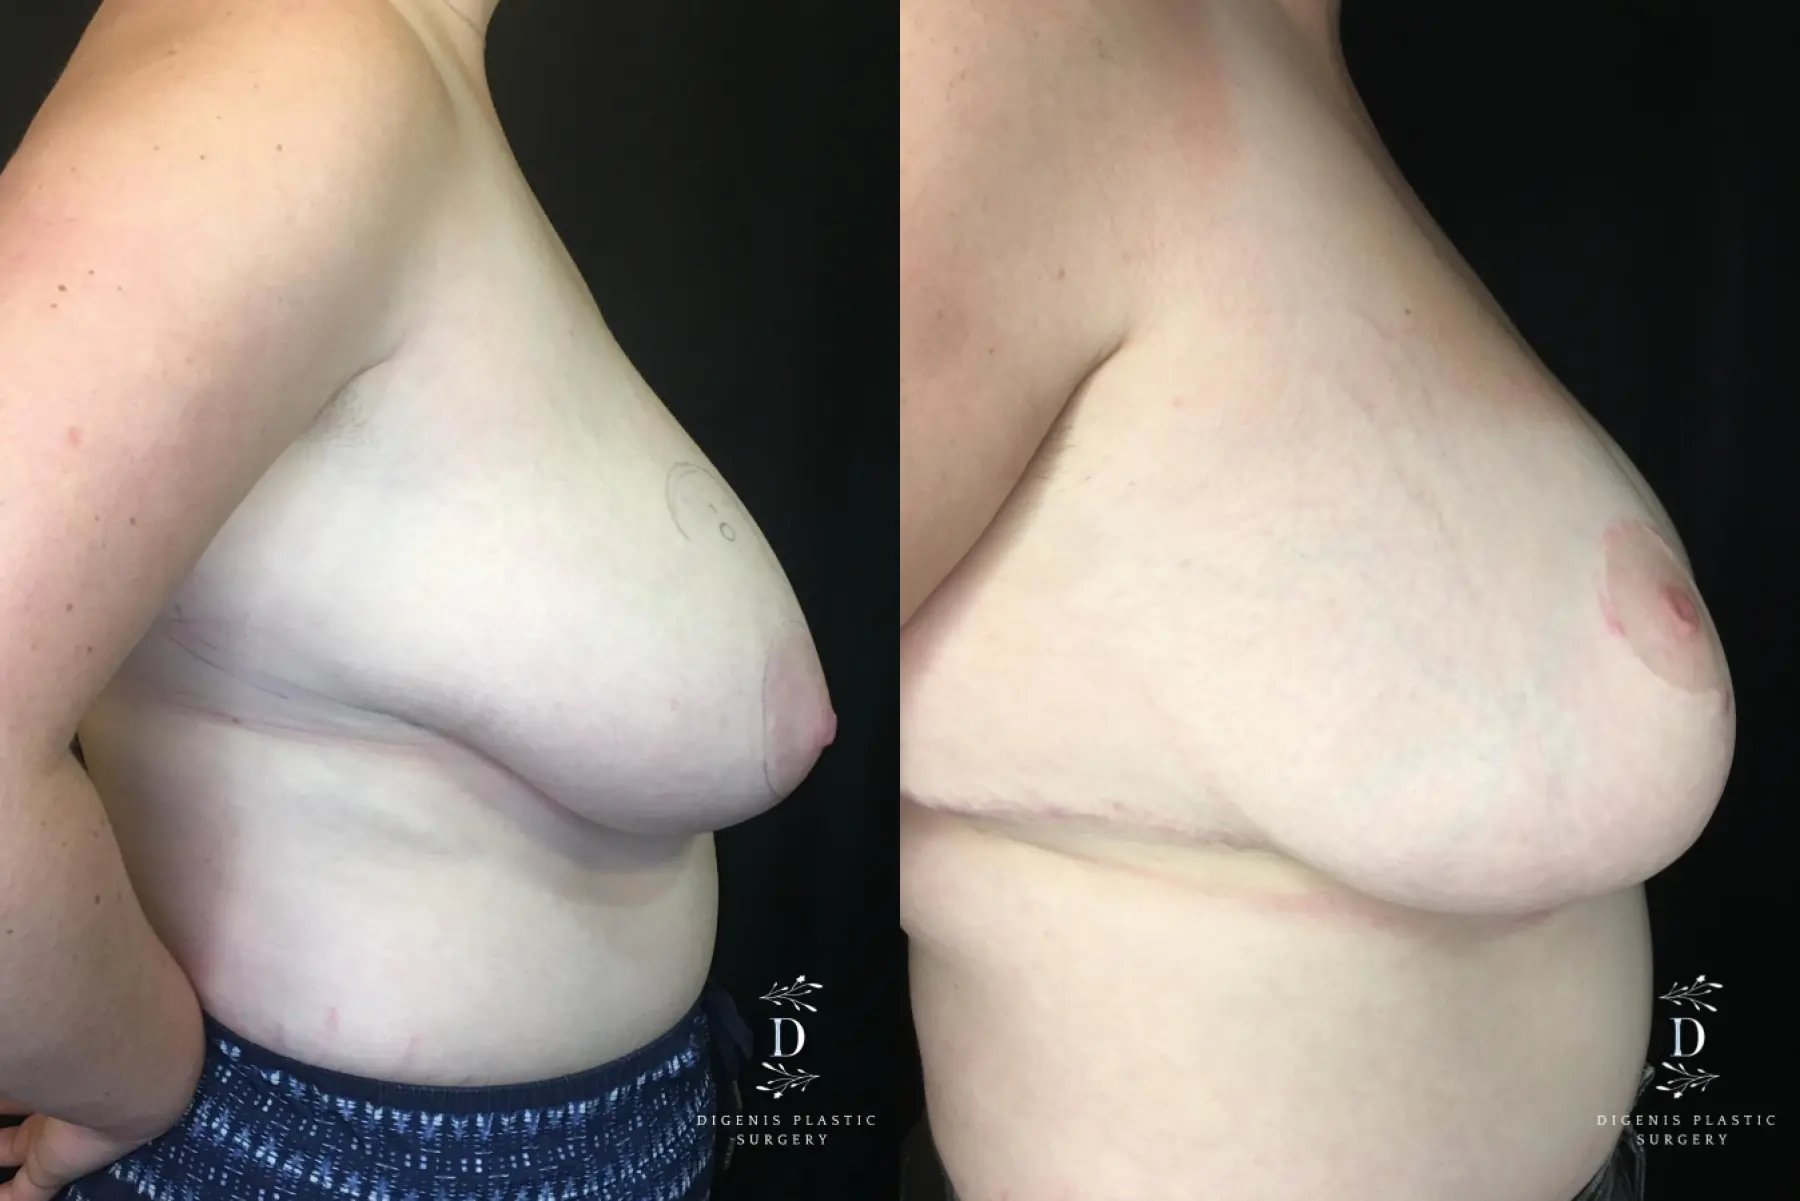 Breast Reduction: Patient 2 - Before and After 3